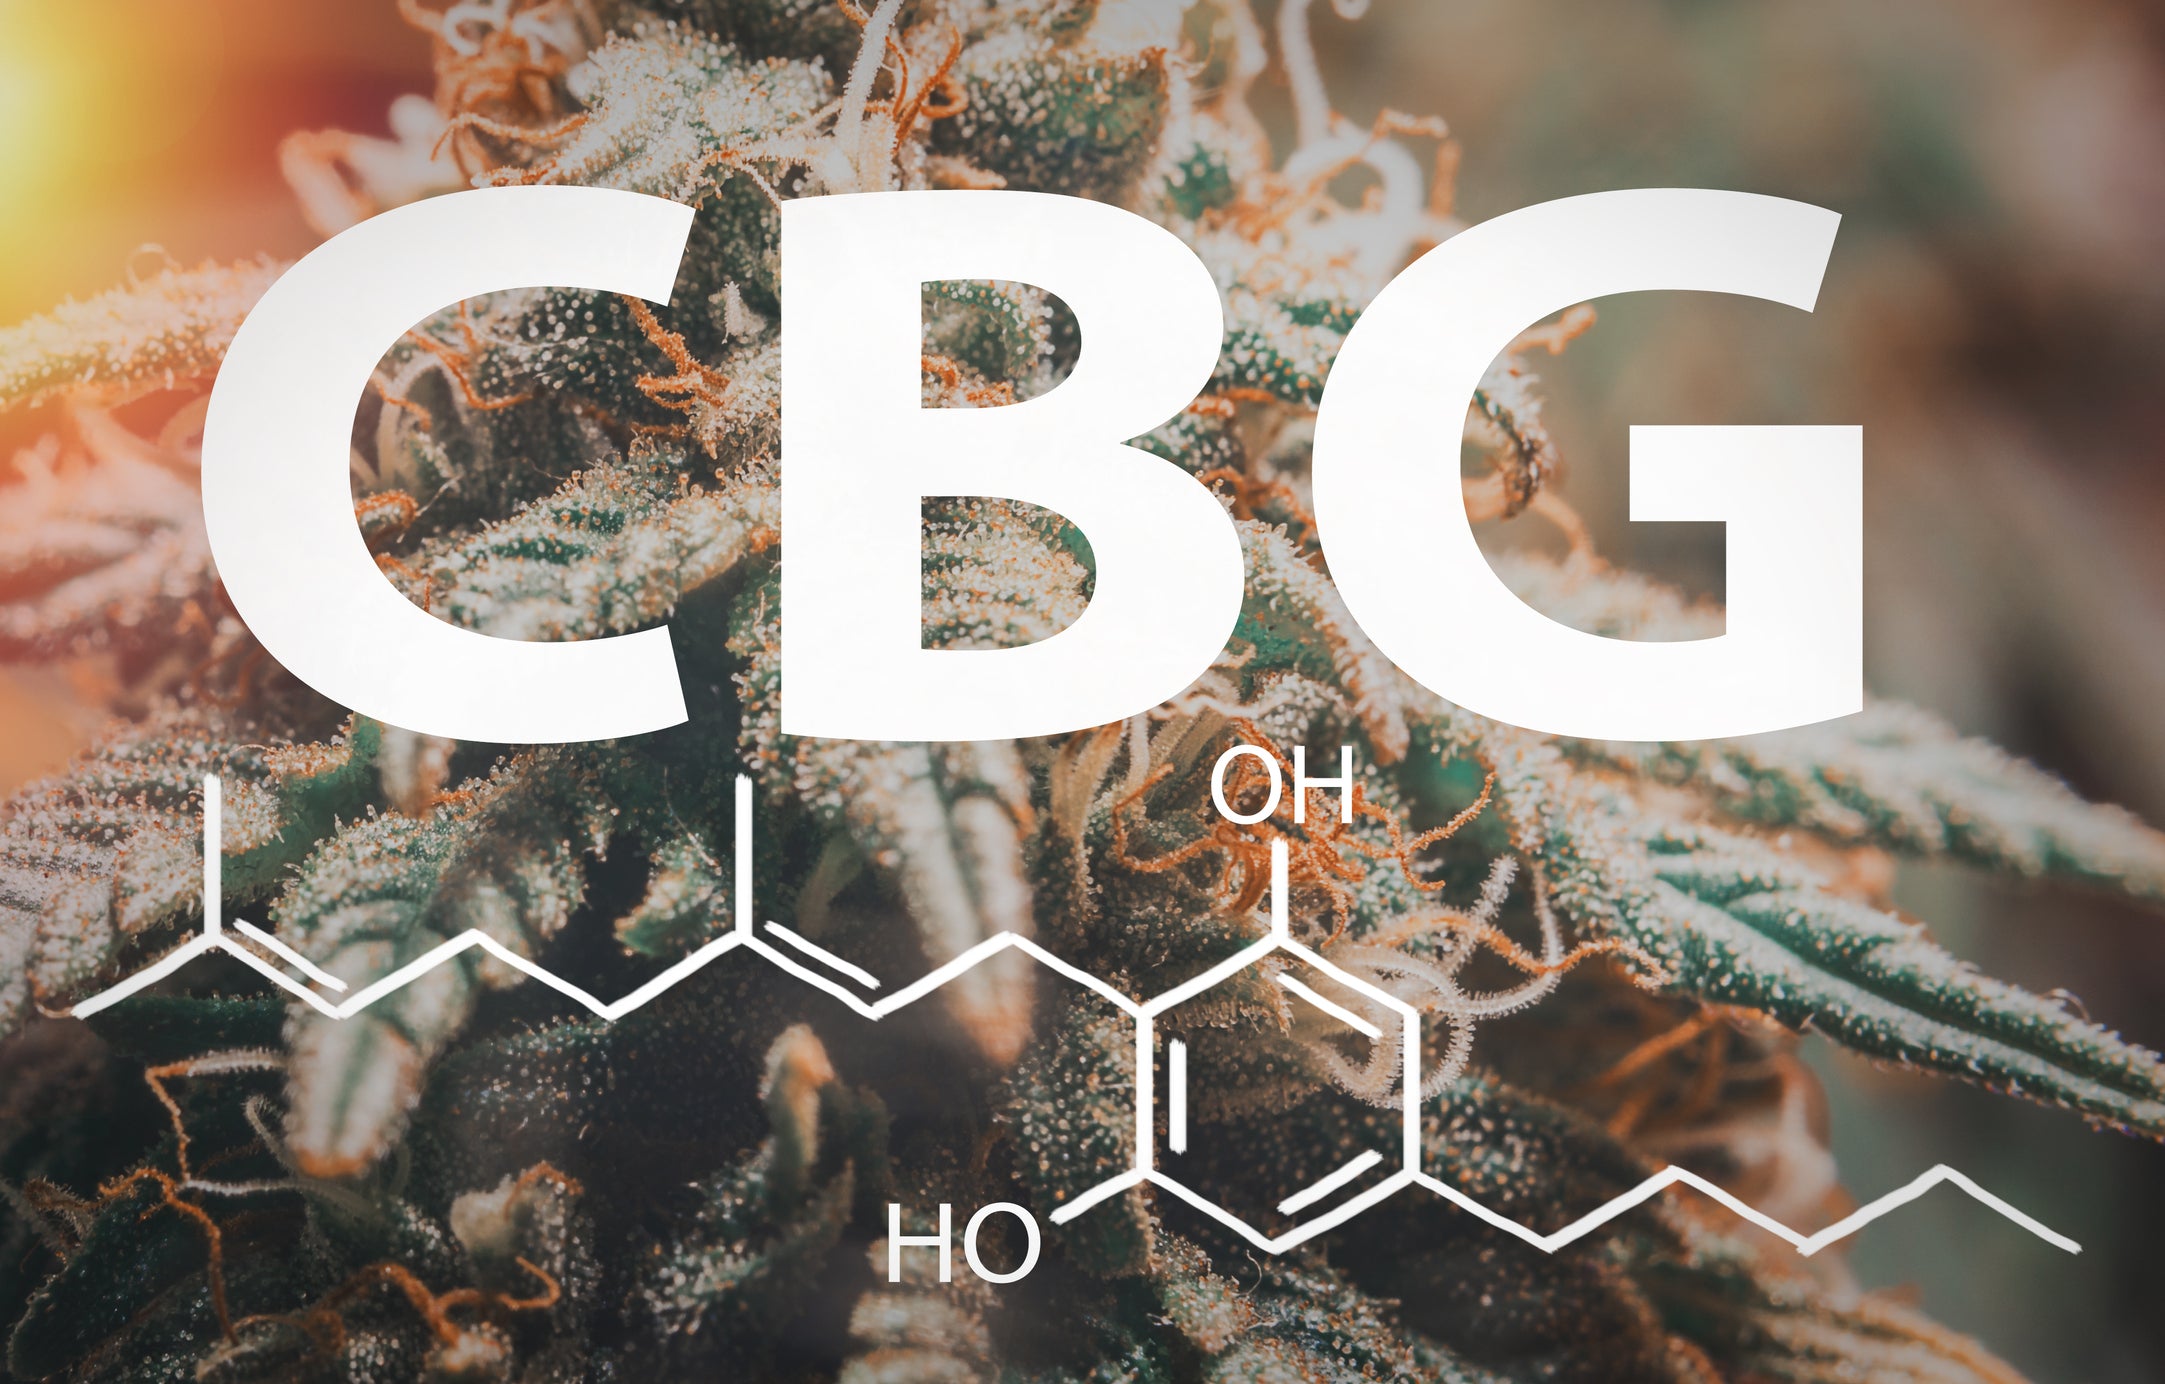 The chemical structure for CBG in cannabis flower is written over a brightly lit nug.